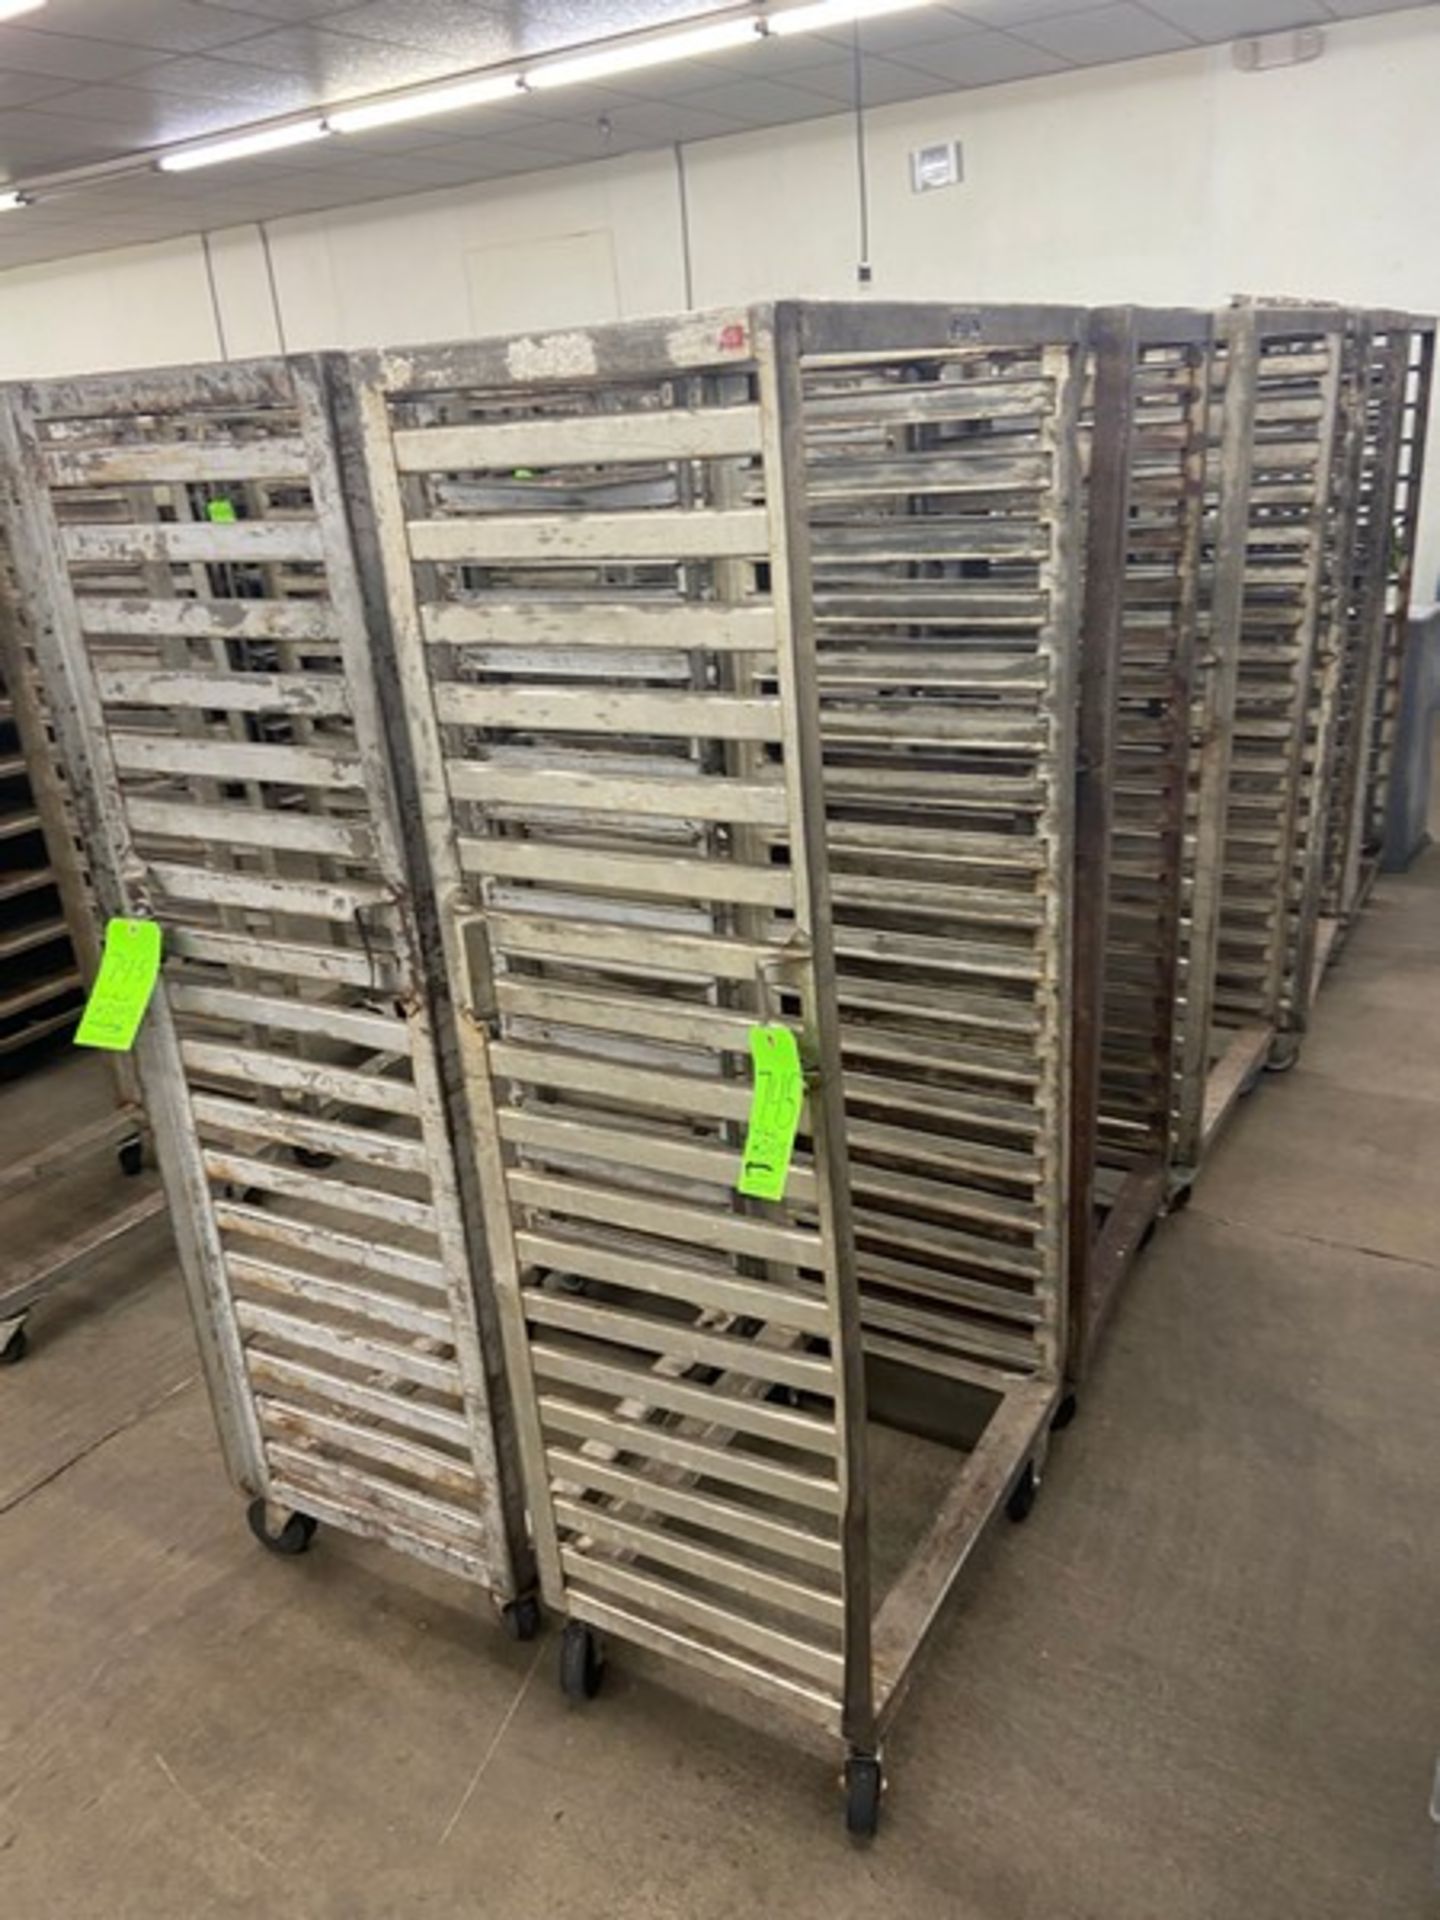 (10) PORTABLE BAKING PAN RACKS, MOUNTED ON CASTERS (LOCATED IN HERMITAGE, PA) - Image 2 of 5